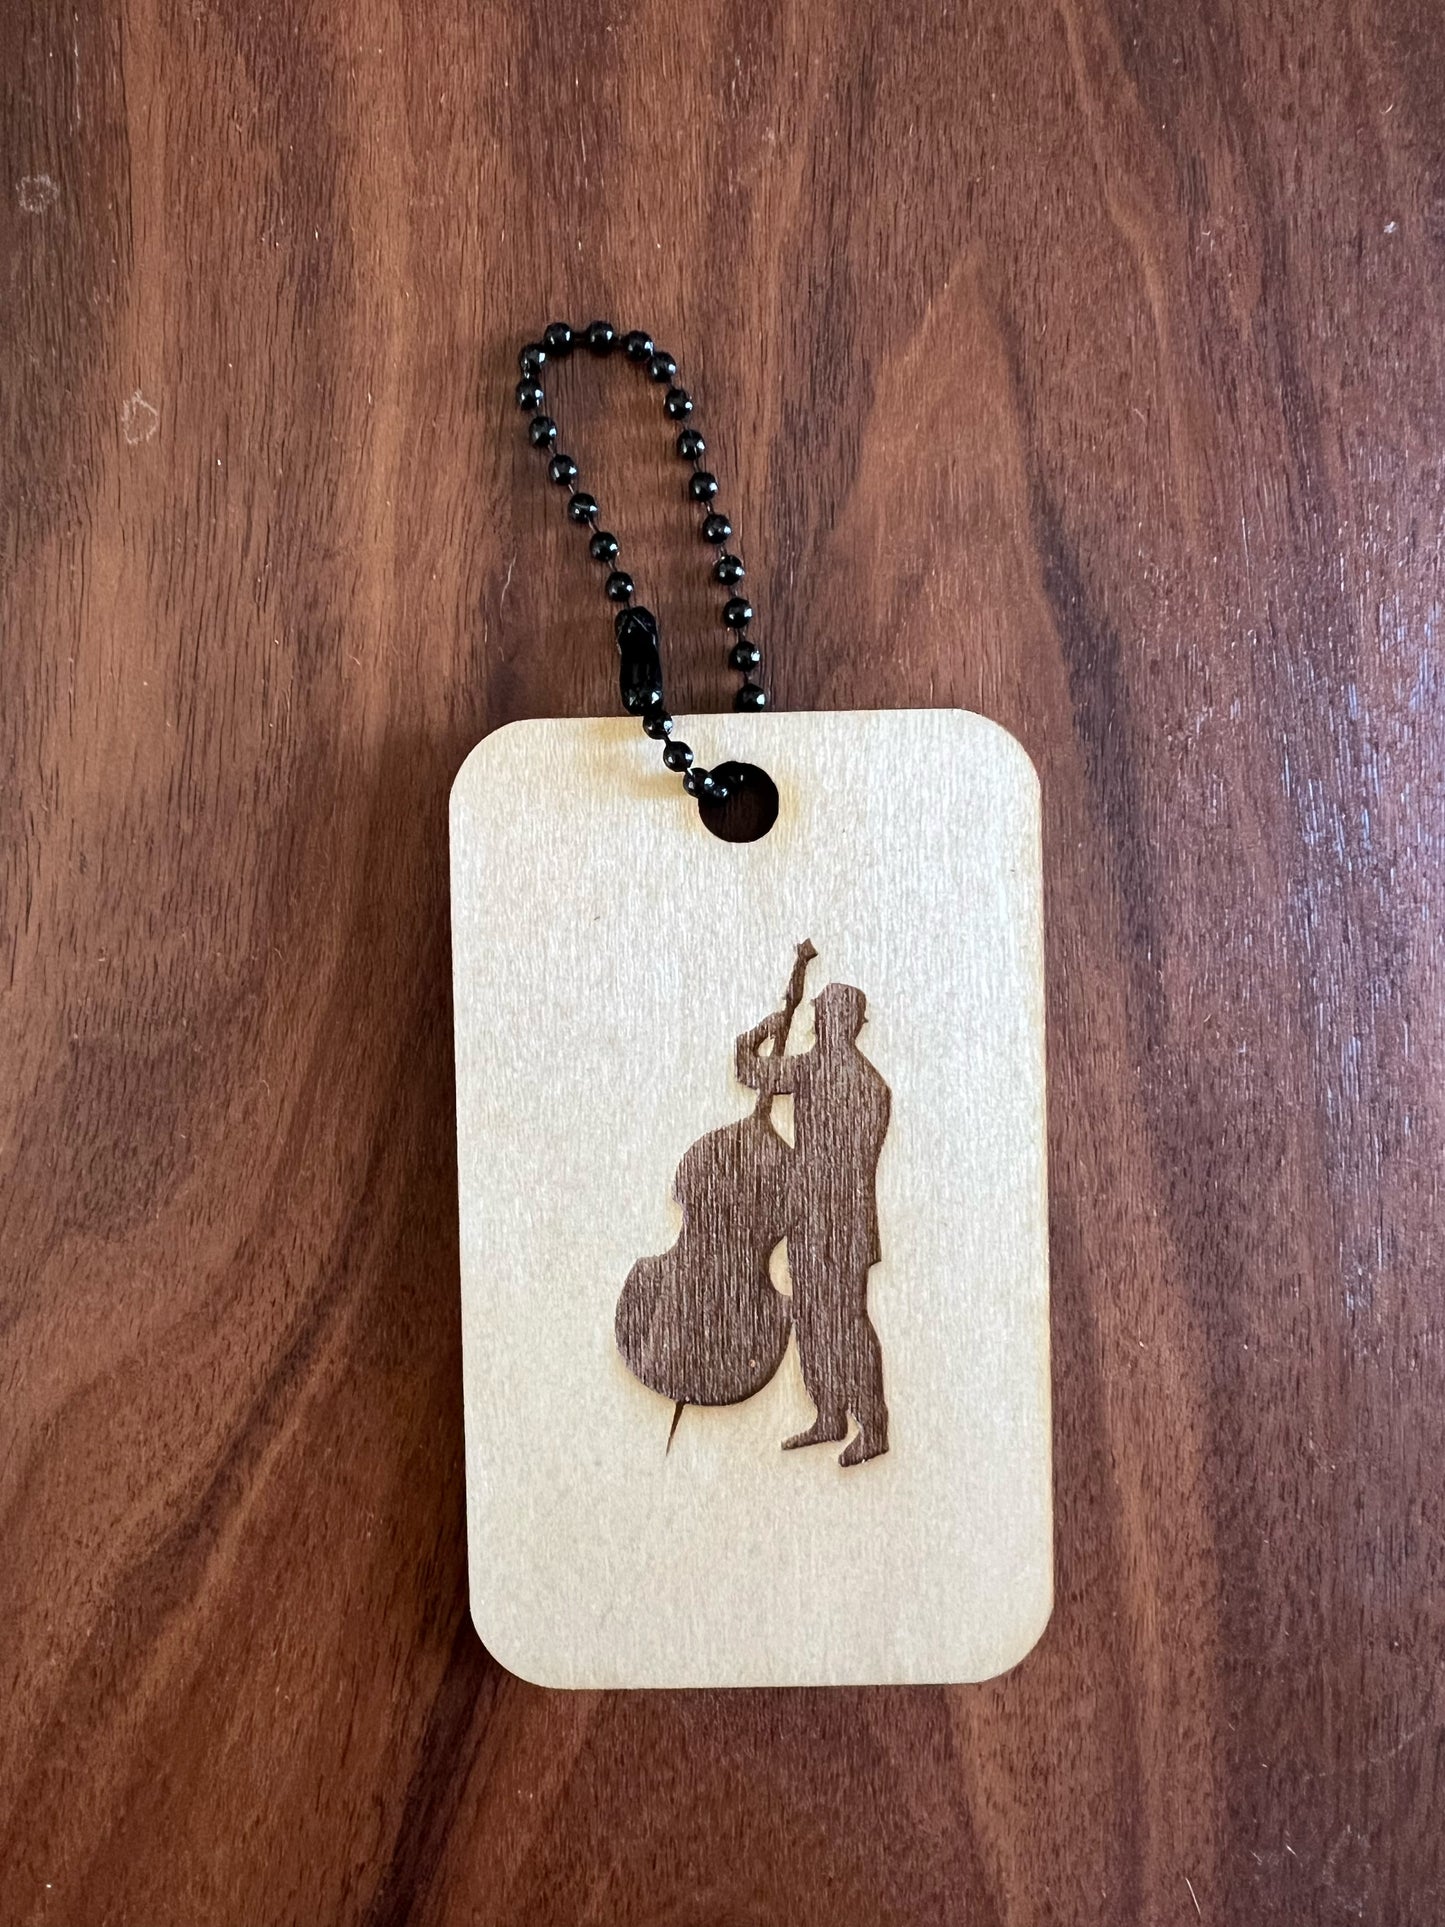 Beautiful Wooden Stringed Instrument Laser Engraved Bag Tags